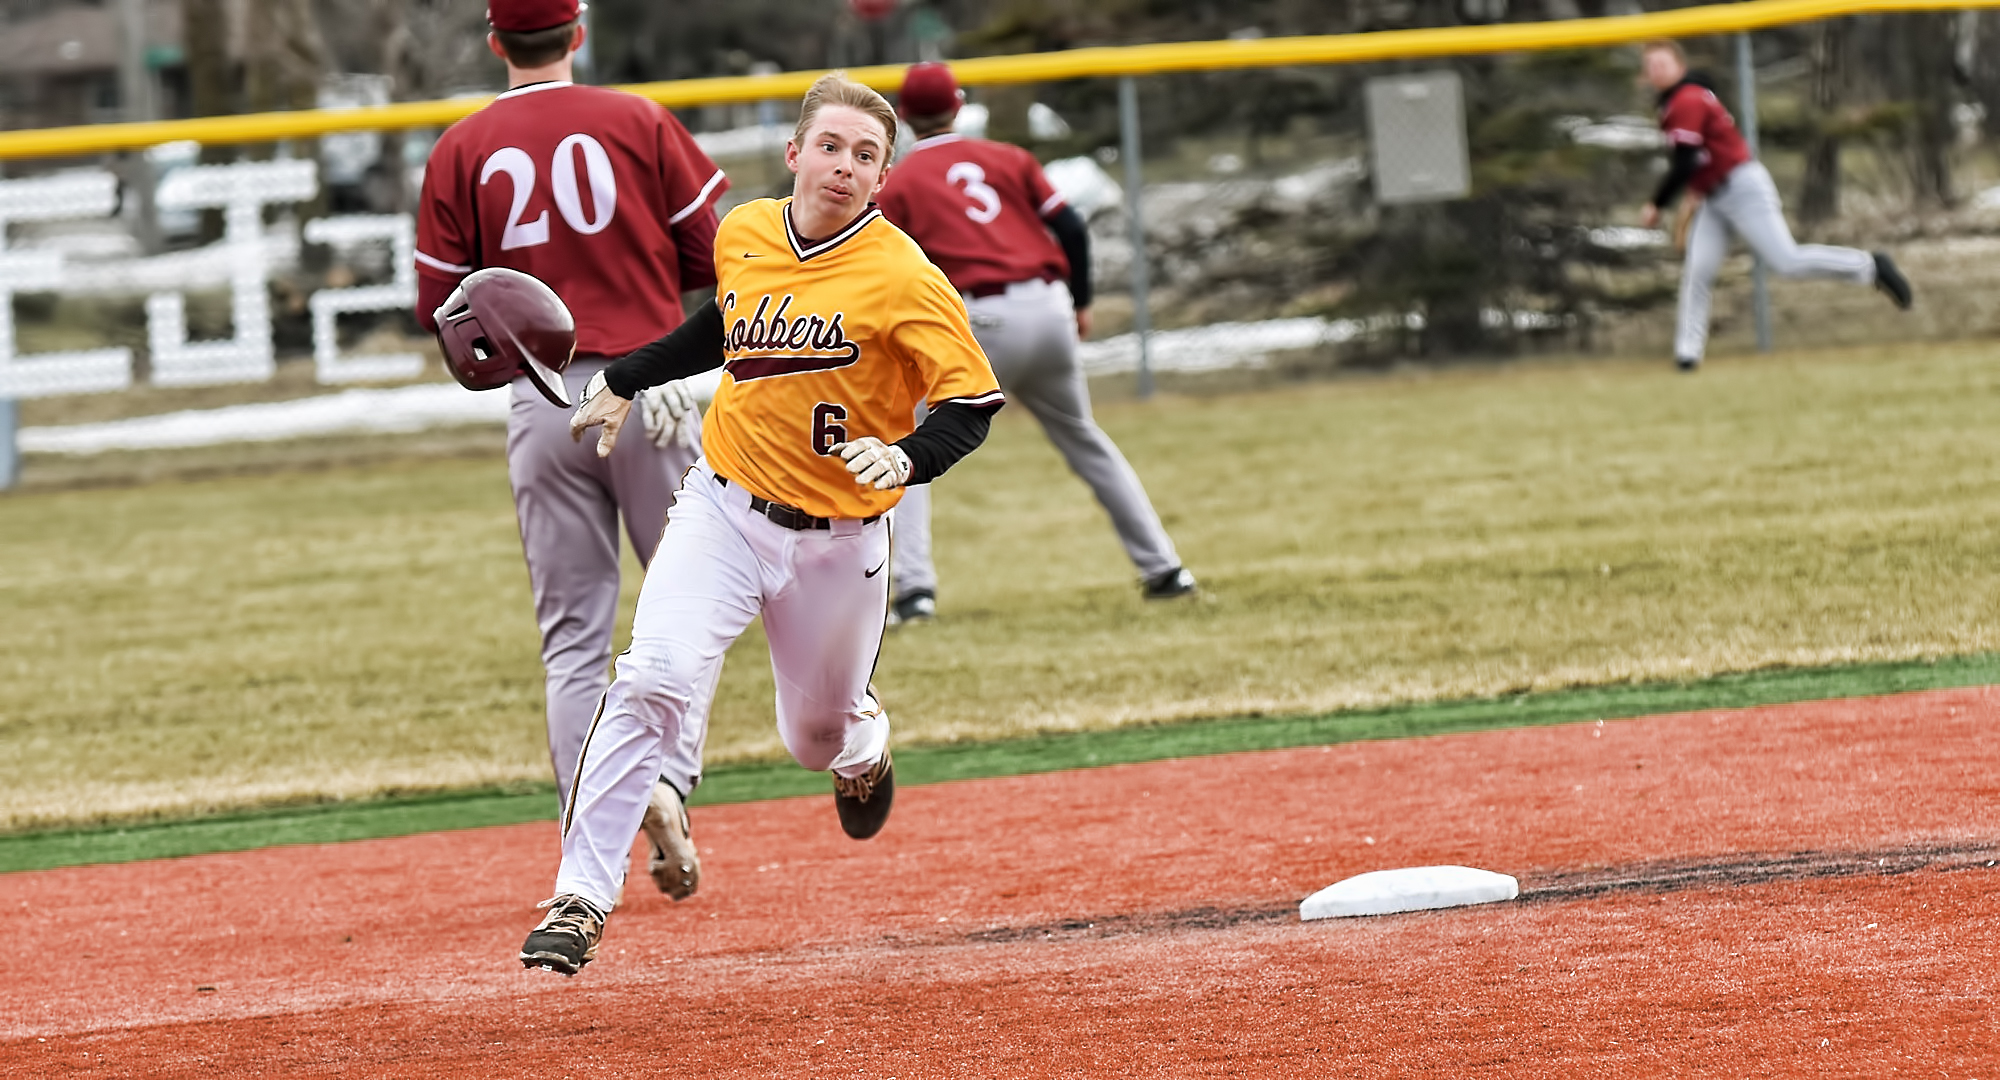 Senior Nate Hoeft had a pair of hits and two RBI in the Cobbers' second-game victory at St. Mary's.